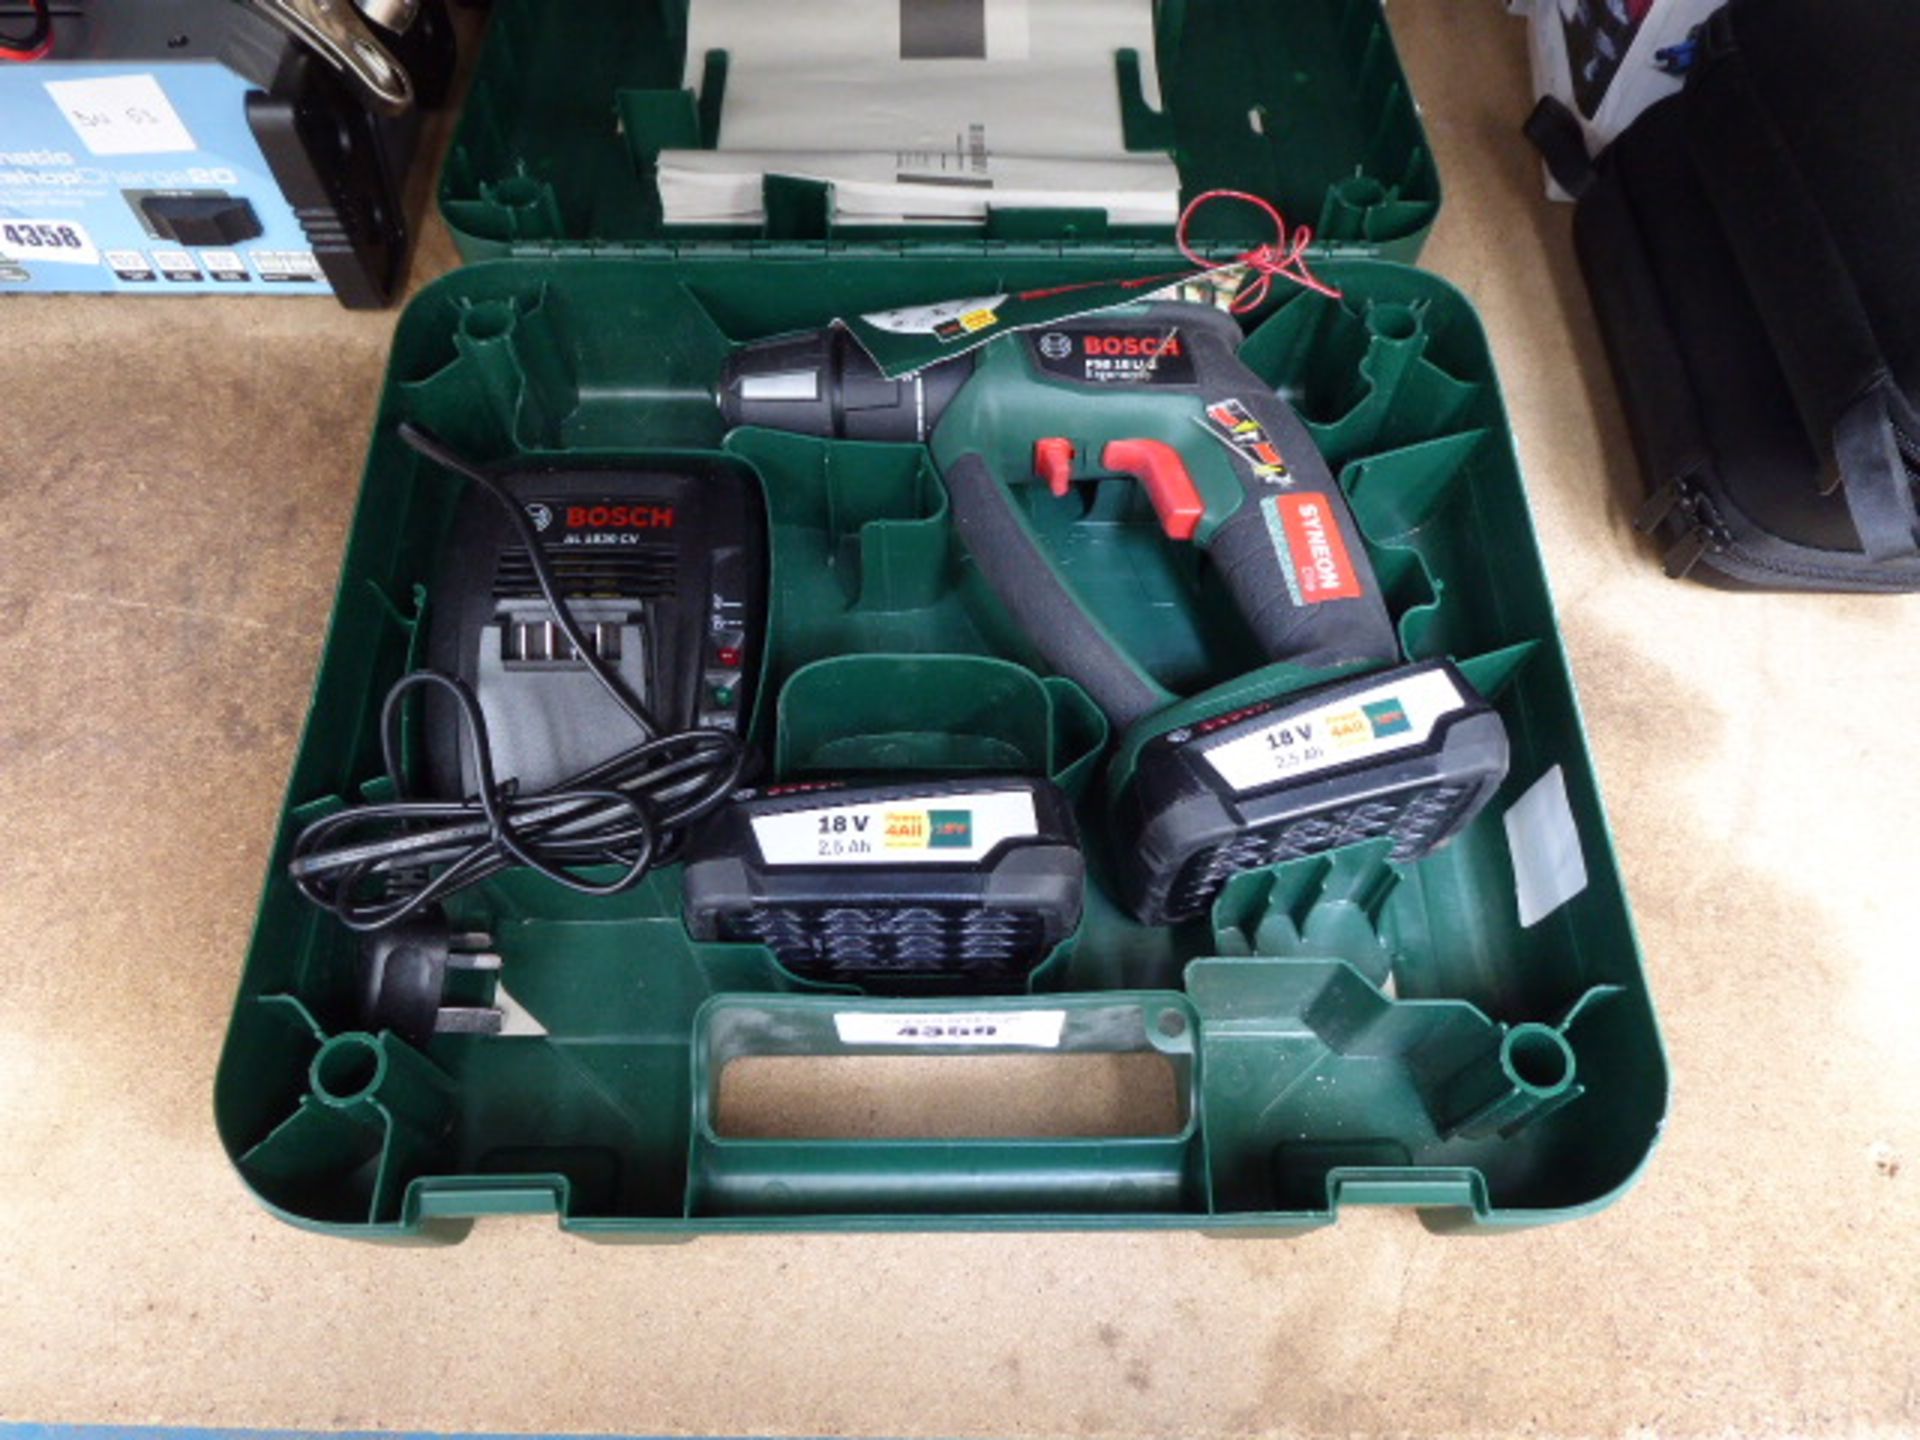 Bosch 18v battery drill with 2 batteries and charger